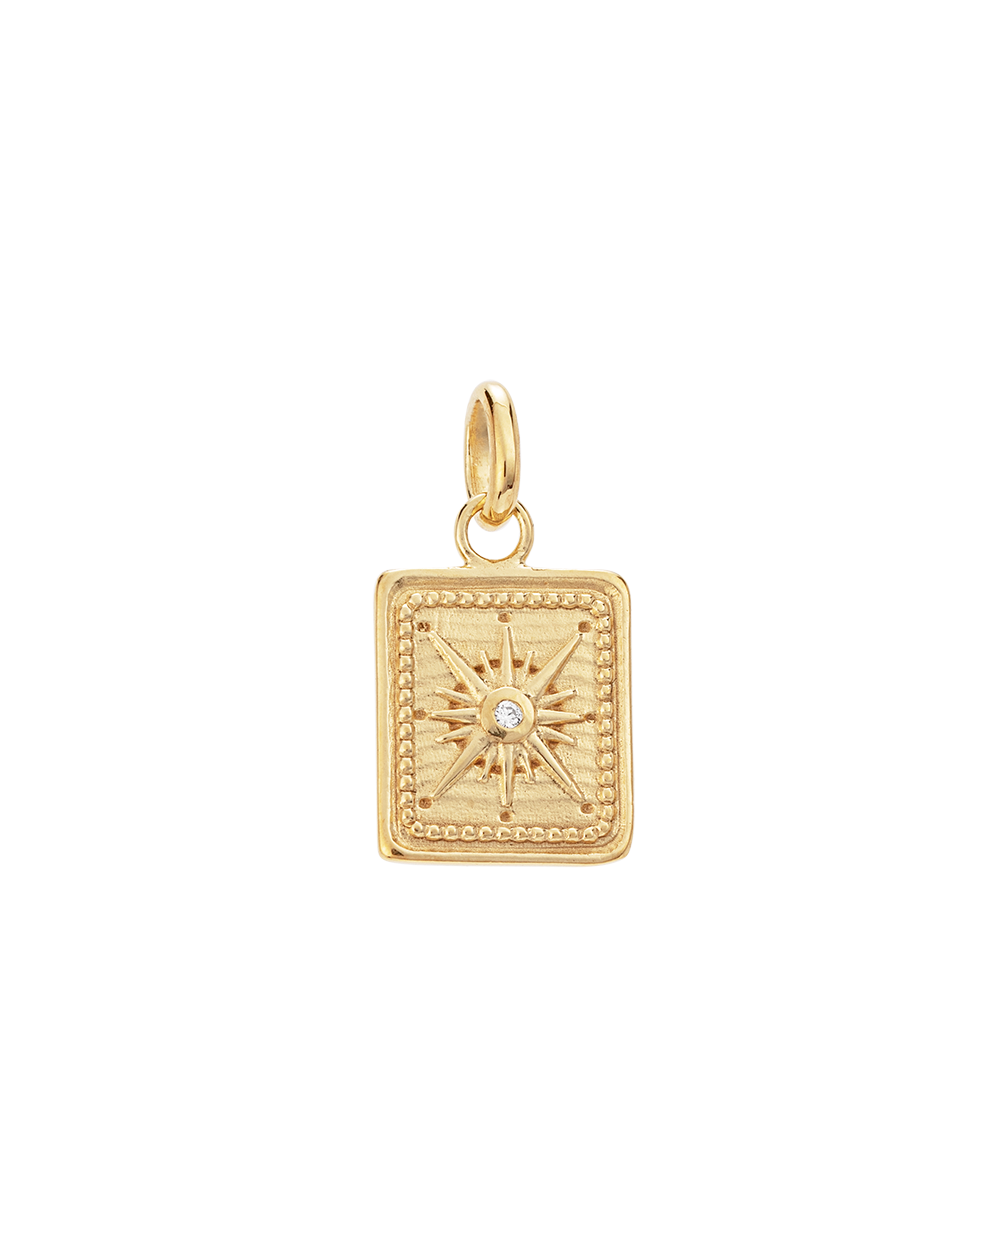 TINY TRUE NORTH COIN (18K GOLD VERMEIL) - IMAGE 1